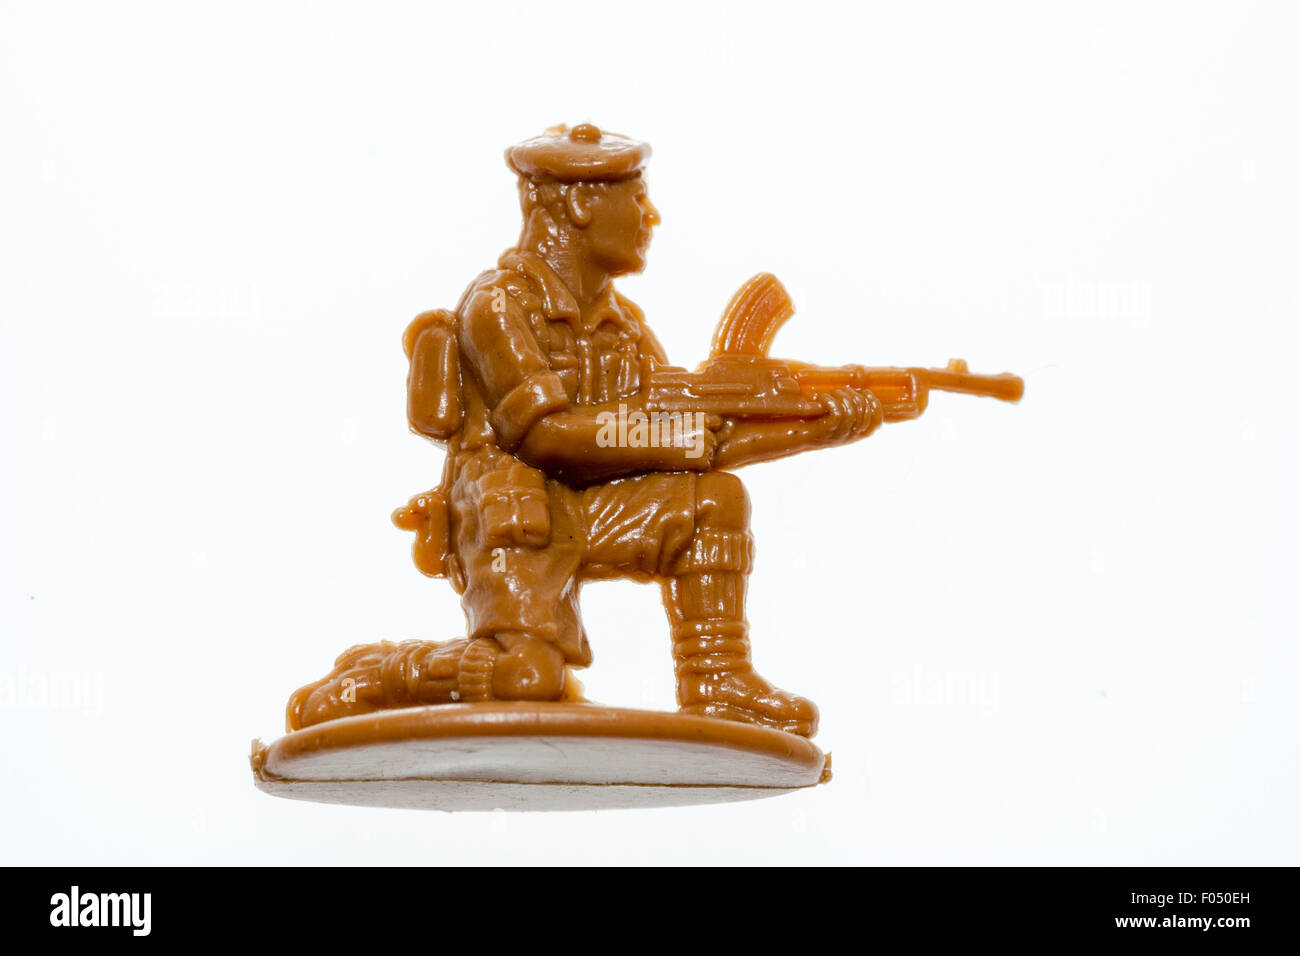 Matchbox HO/00 scale model toy figure. 8th Army world war two soldier kneeling down firing a Bren gun against plain white background. Stock Photo